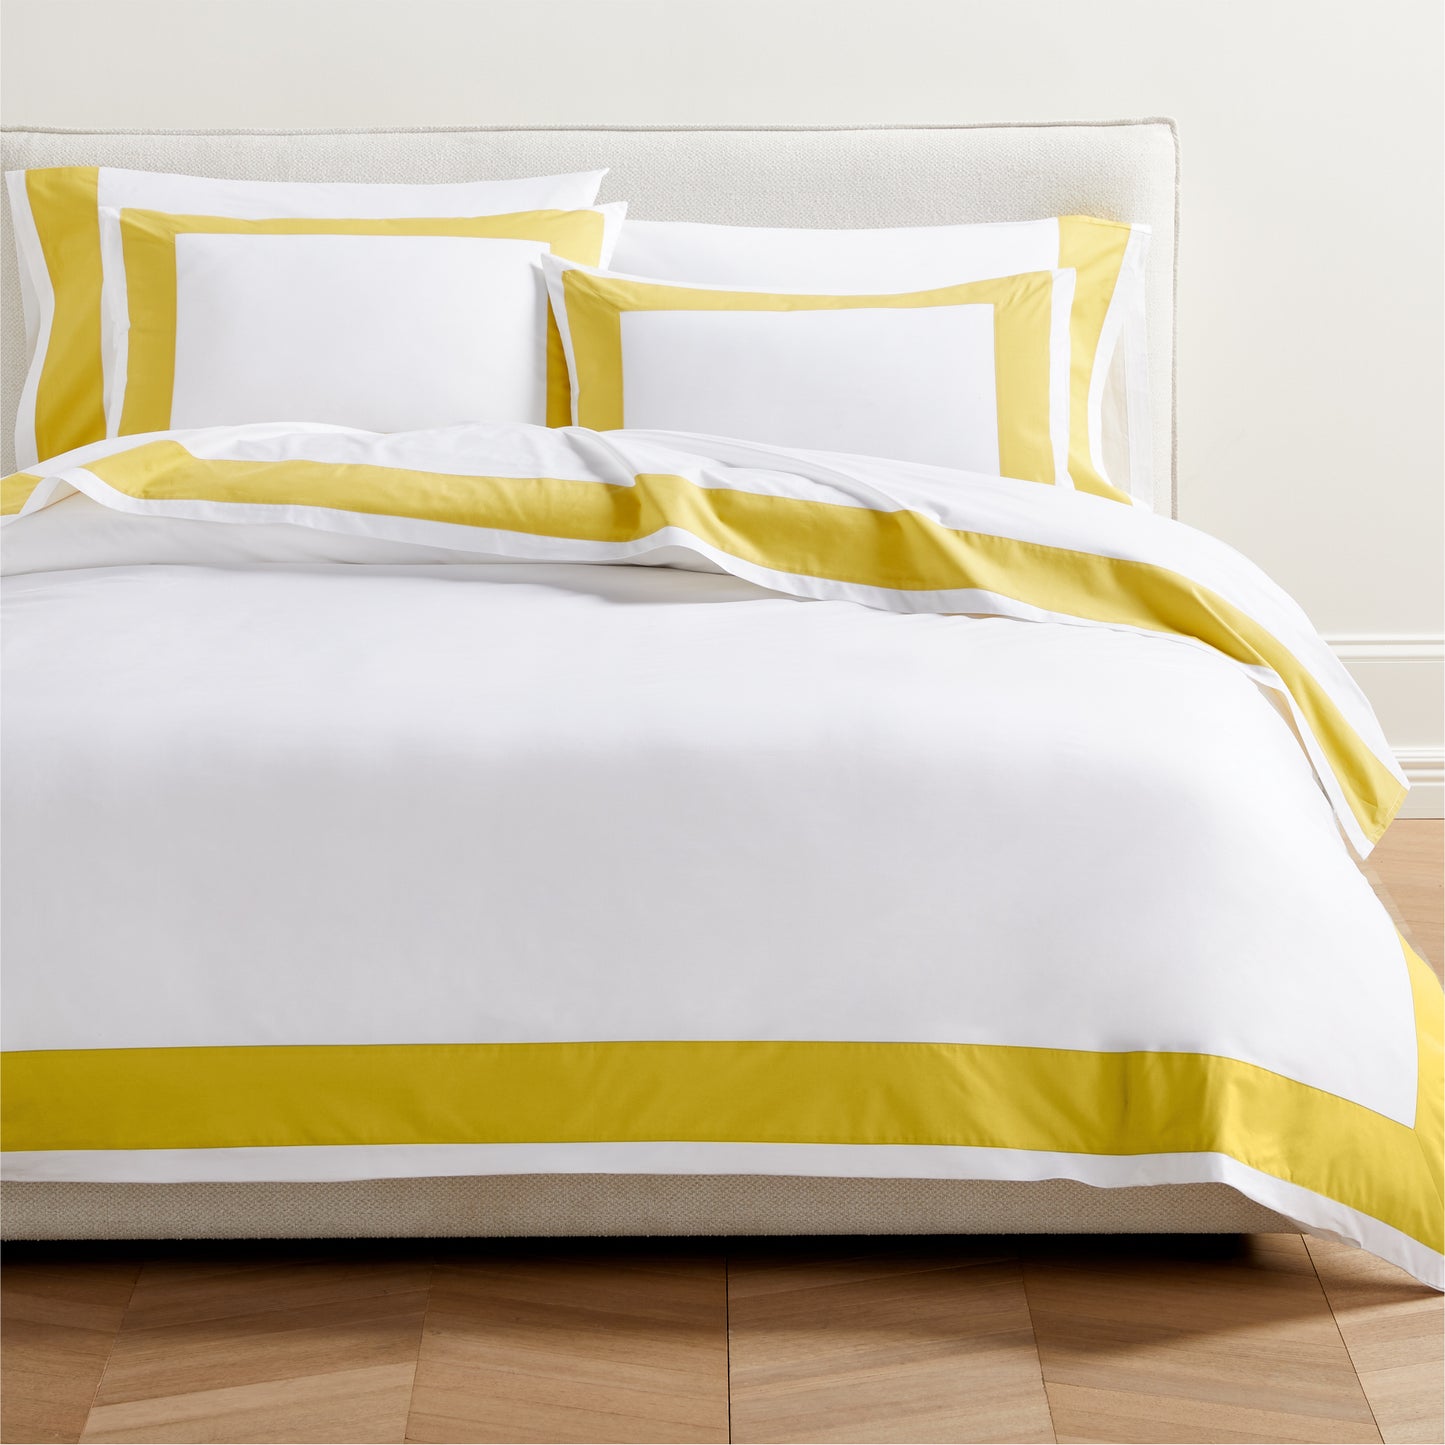 Yellow Wide-Band Percale Pillow Shams, set of 2